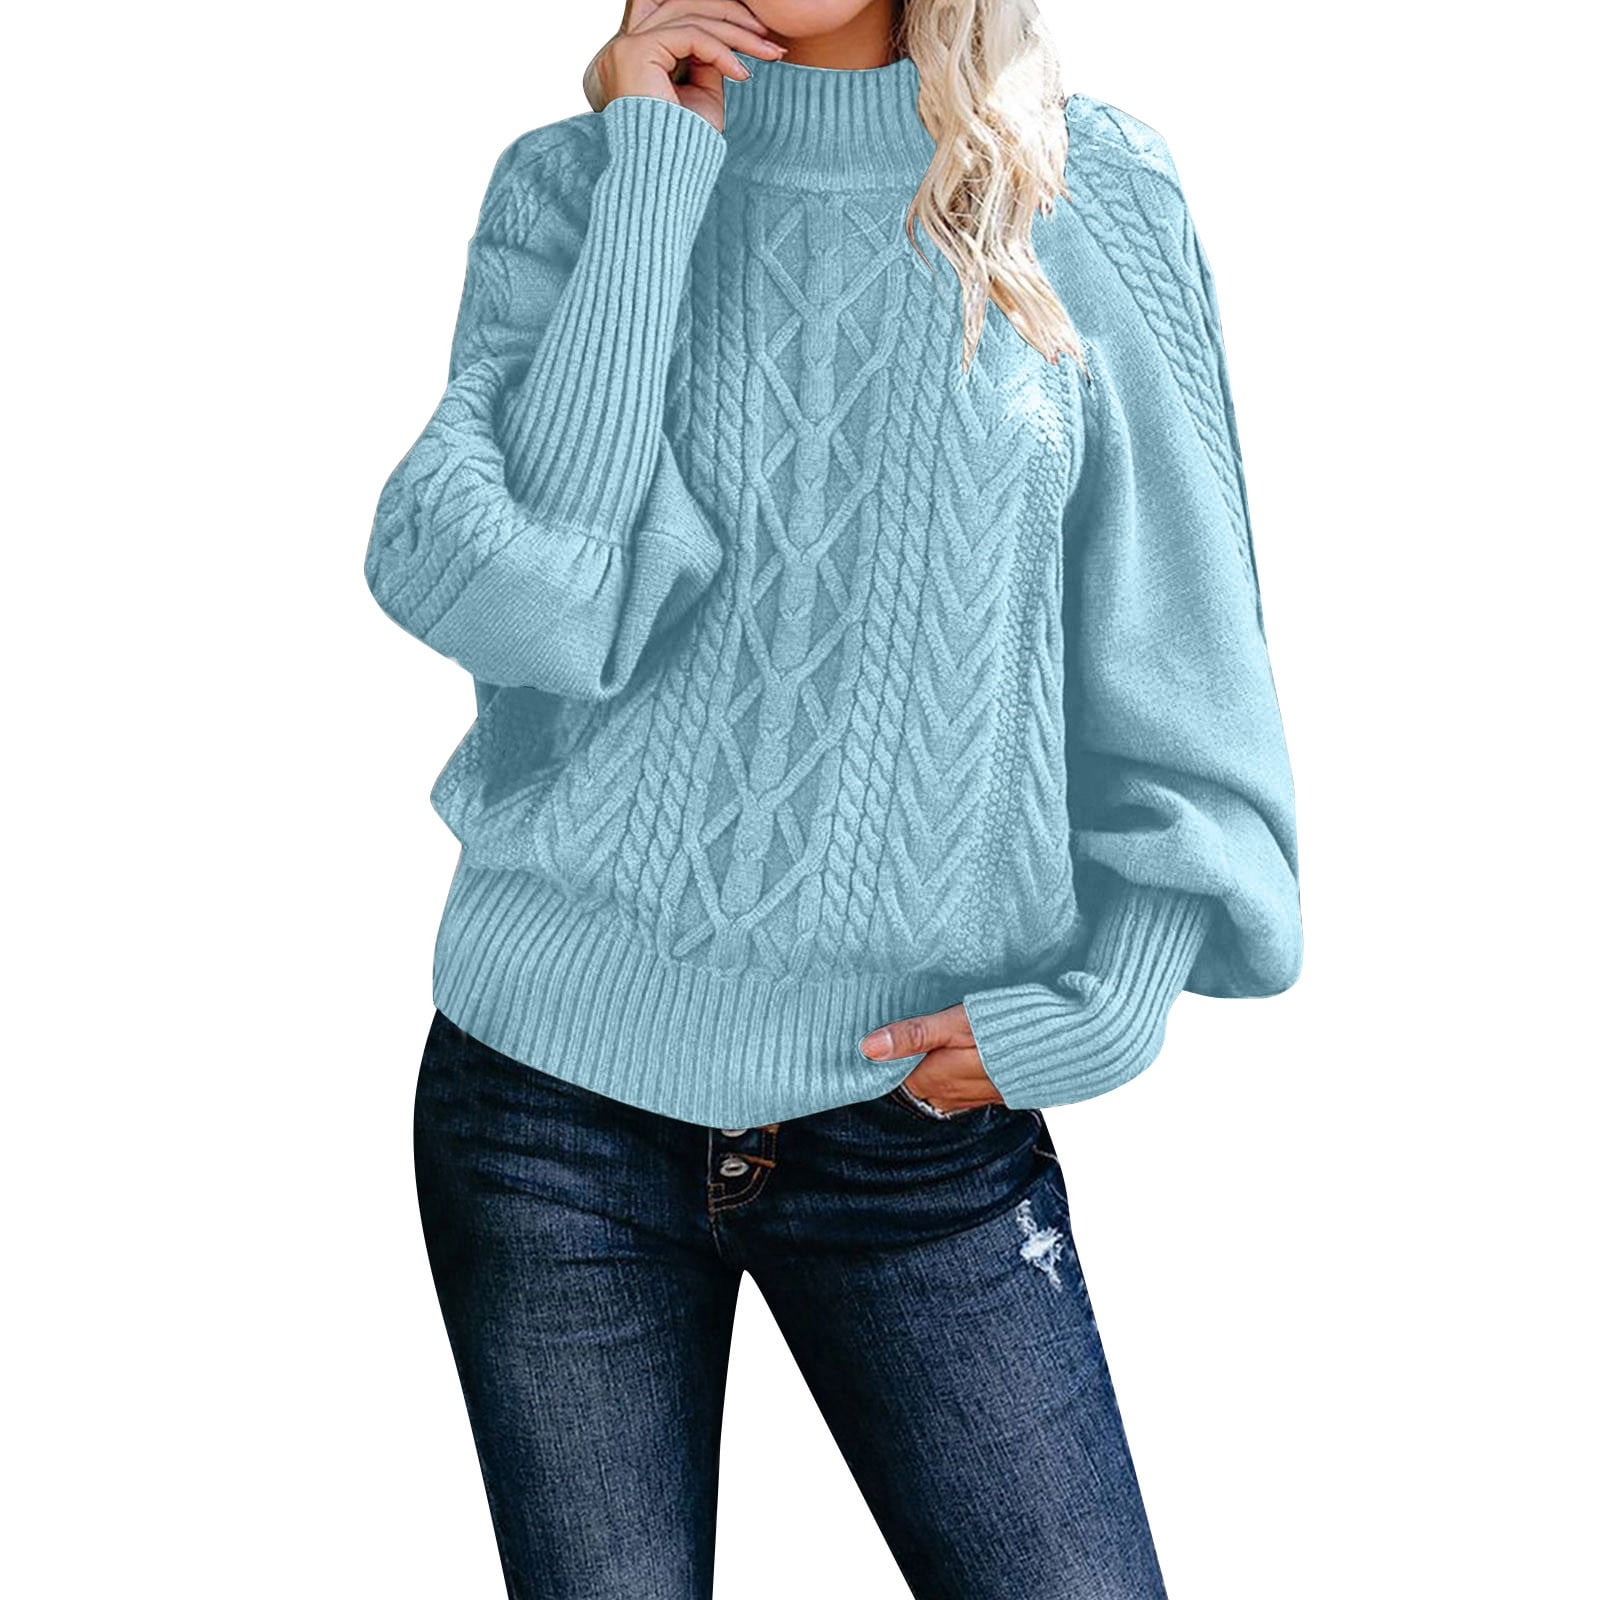 Bkolouuoe Winter Shirts Ladies Mid Neck Sweater Loose Long Sleeve Knit  Solid Color Sweater Pullover Top Pullover Half Zip Sweaters for Women 